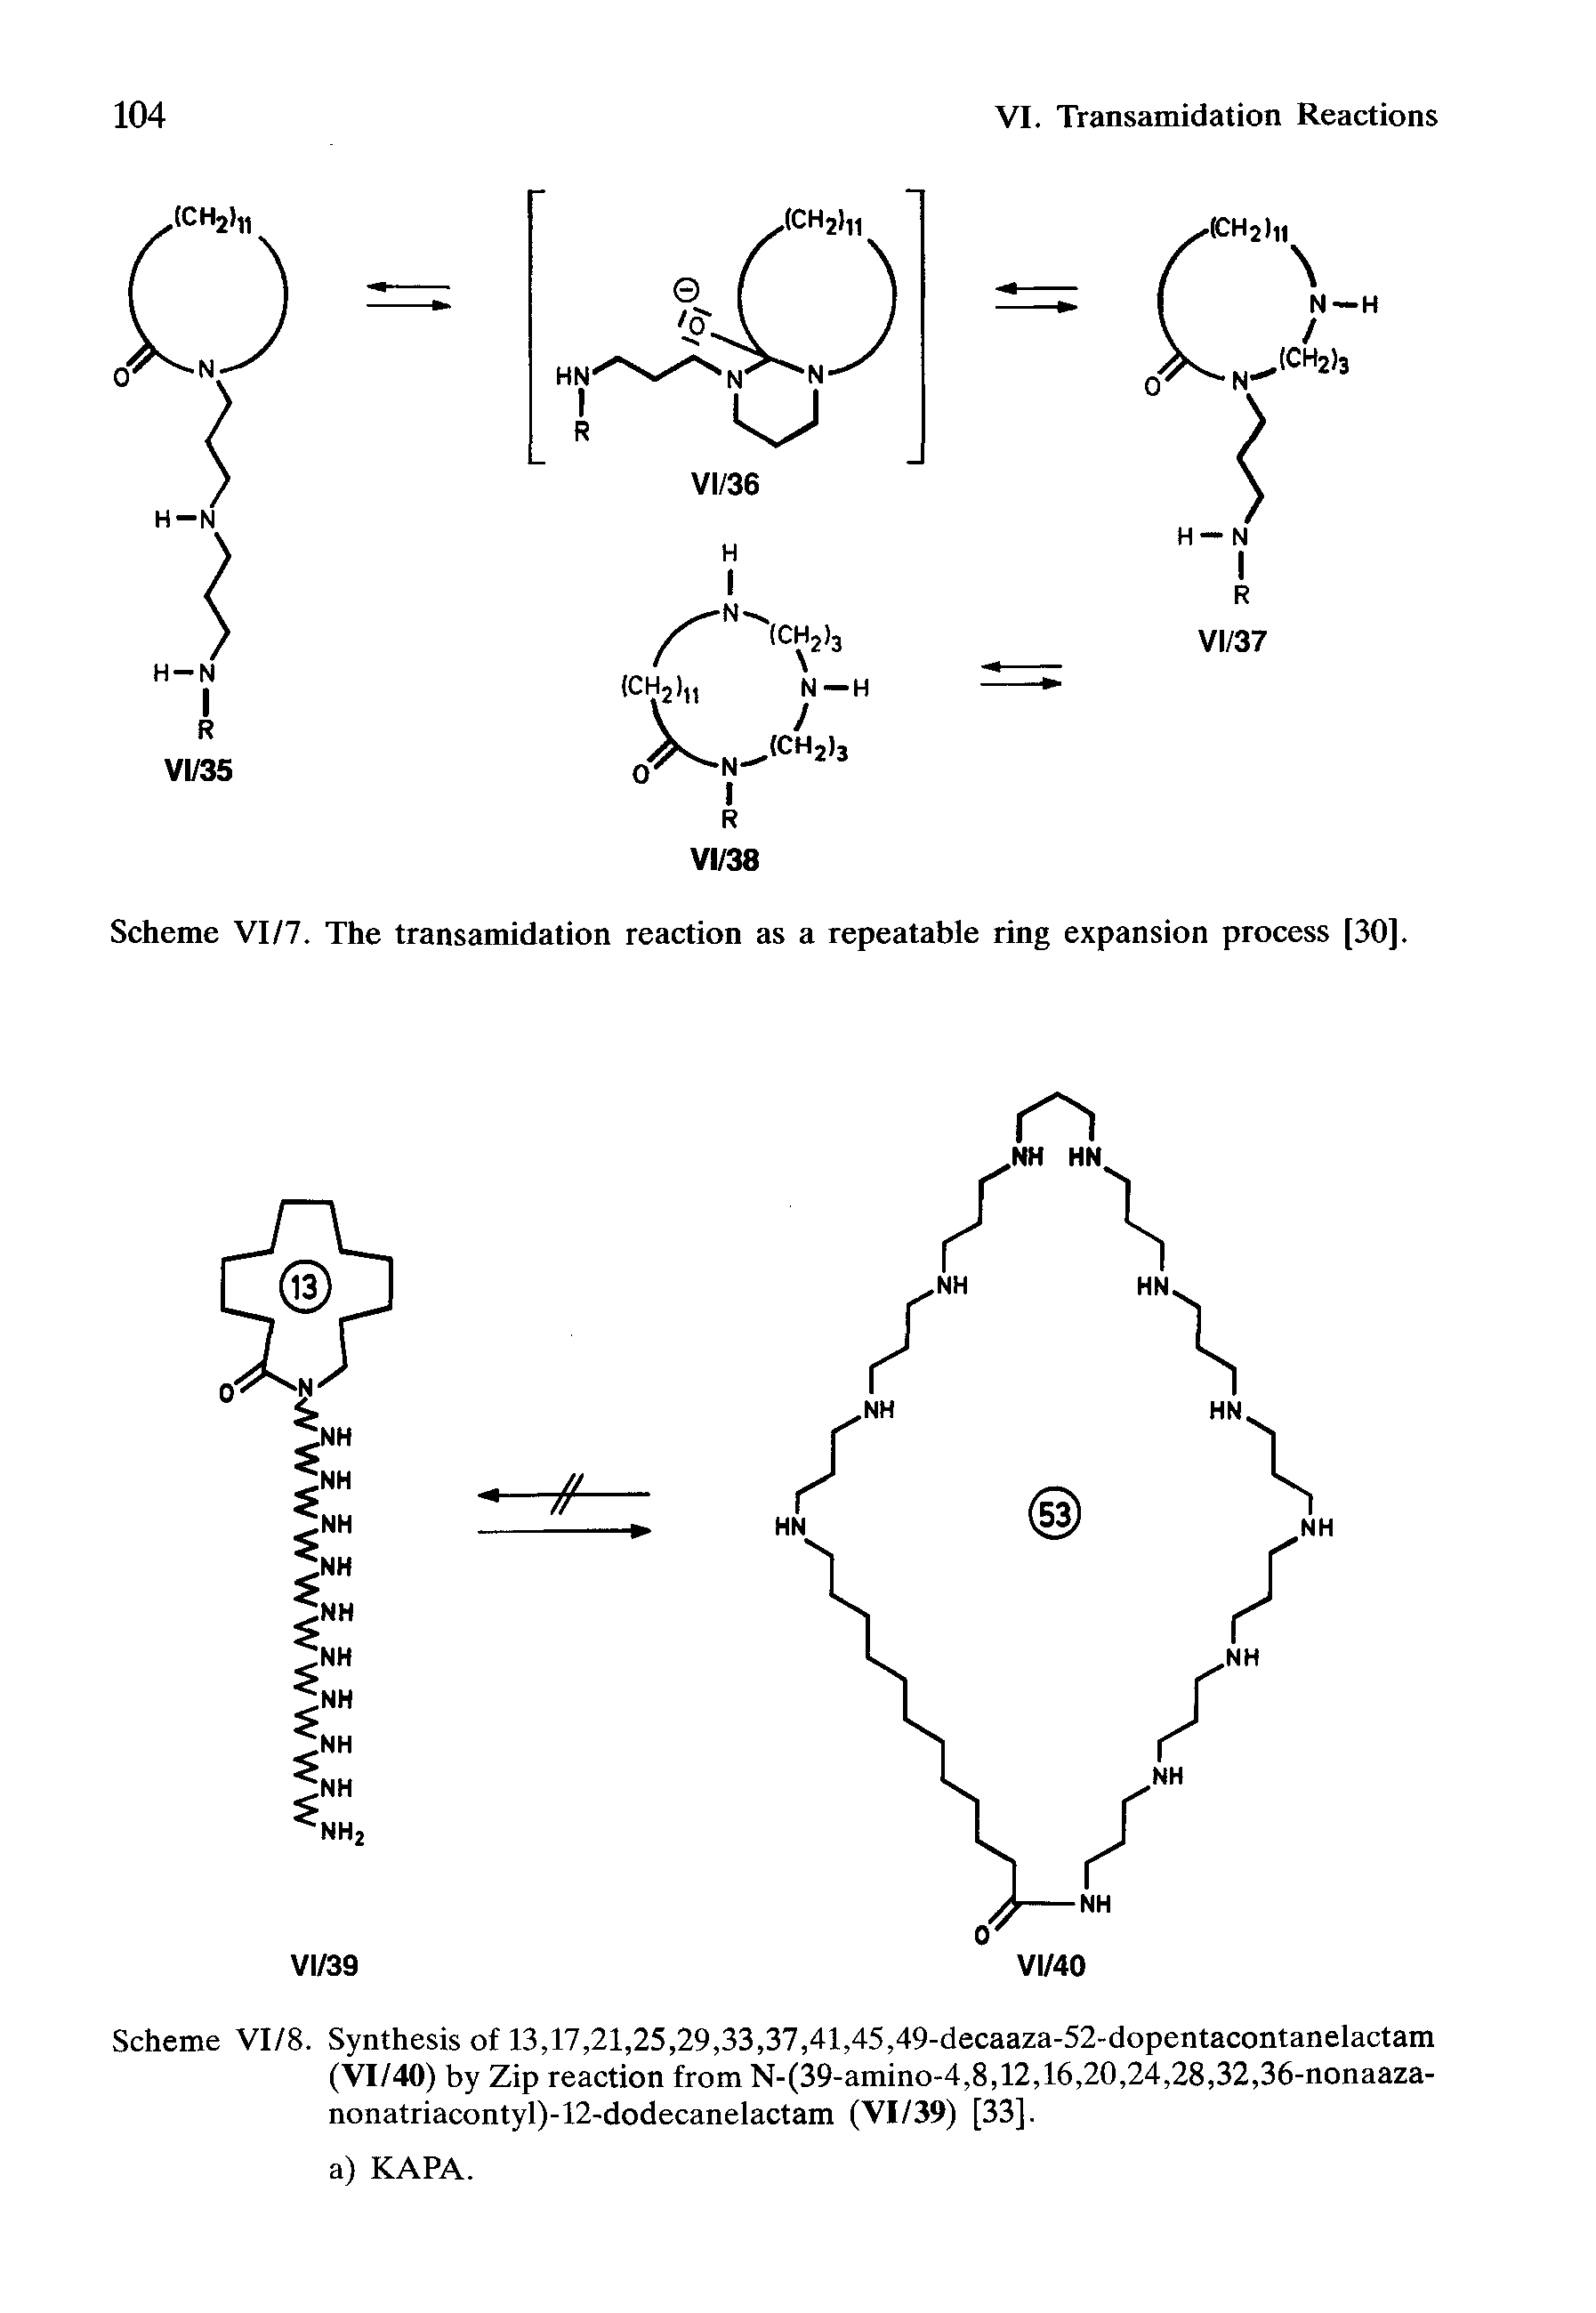 Scheme VI/7. The transamidation reaction as a repeatable ring expansion process [30].